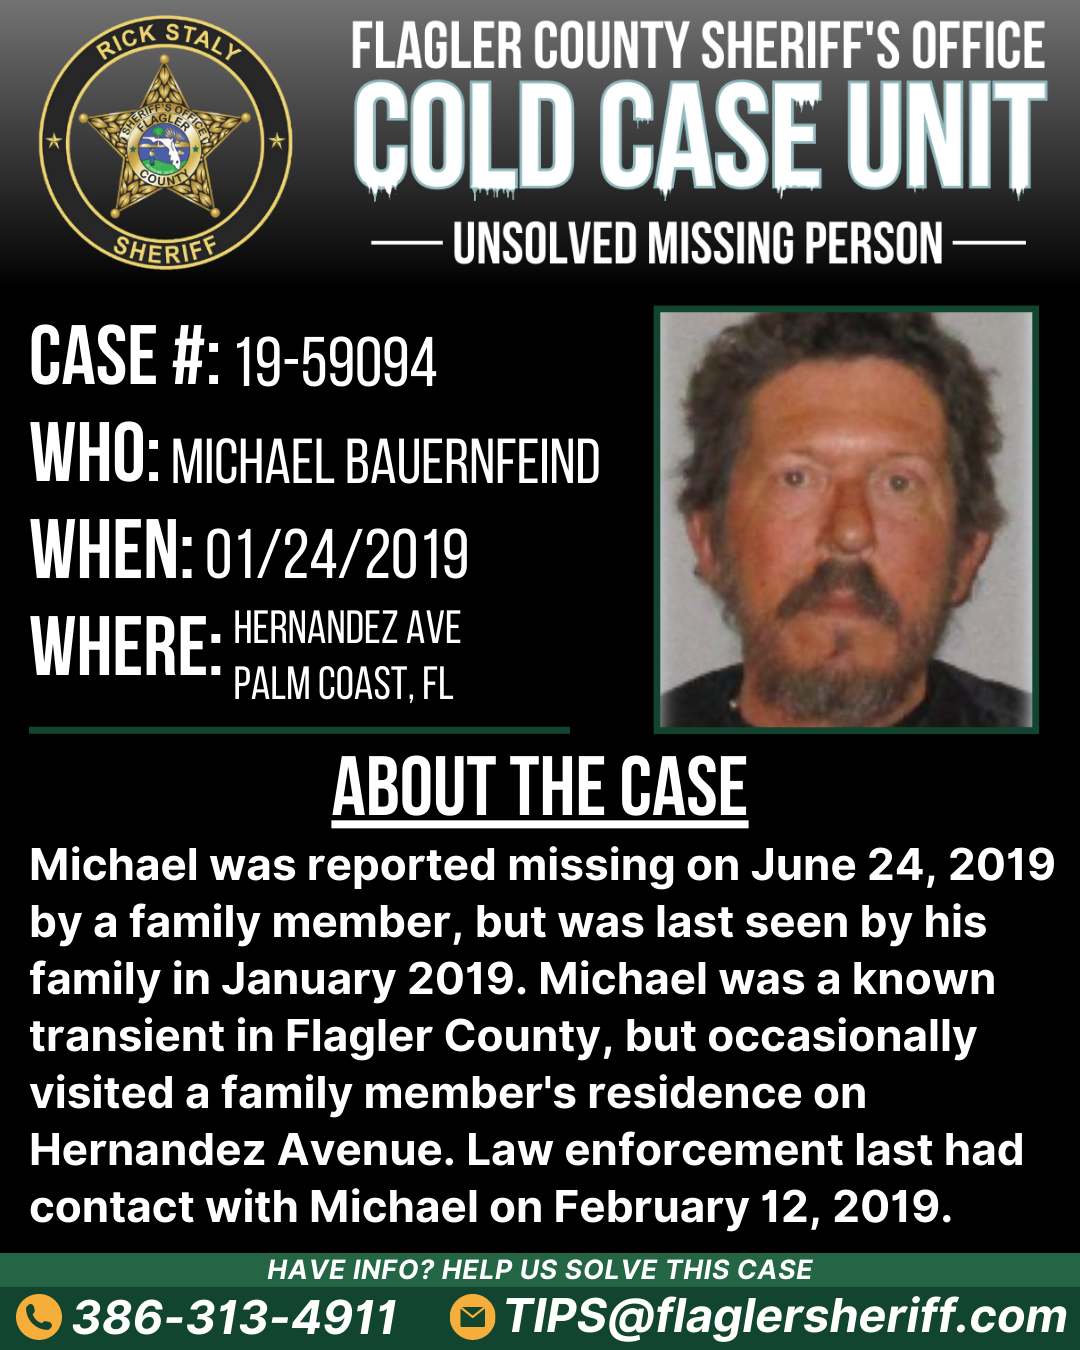 Case #19-59094. Missing Person. Who: Michael Bauernfeind. When: 01/24/2019. Where: Hernandez Avenue (Palm Coast, FL). About the case: Michael was reported missing on June 24, 2019 by a family member, but was last seen by his family in January 2019. Michael was a known transient in Flagler County, but occasionally visited a family member's residence on Hernandez Avenue. Law enforcement last had contact with Michael on February 12, 2019.